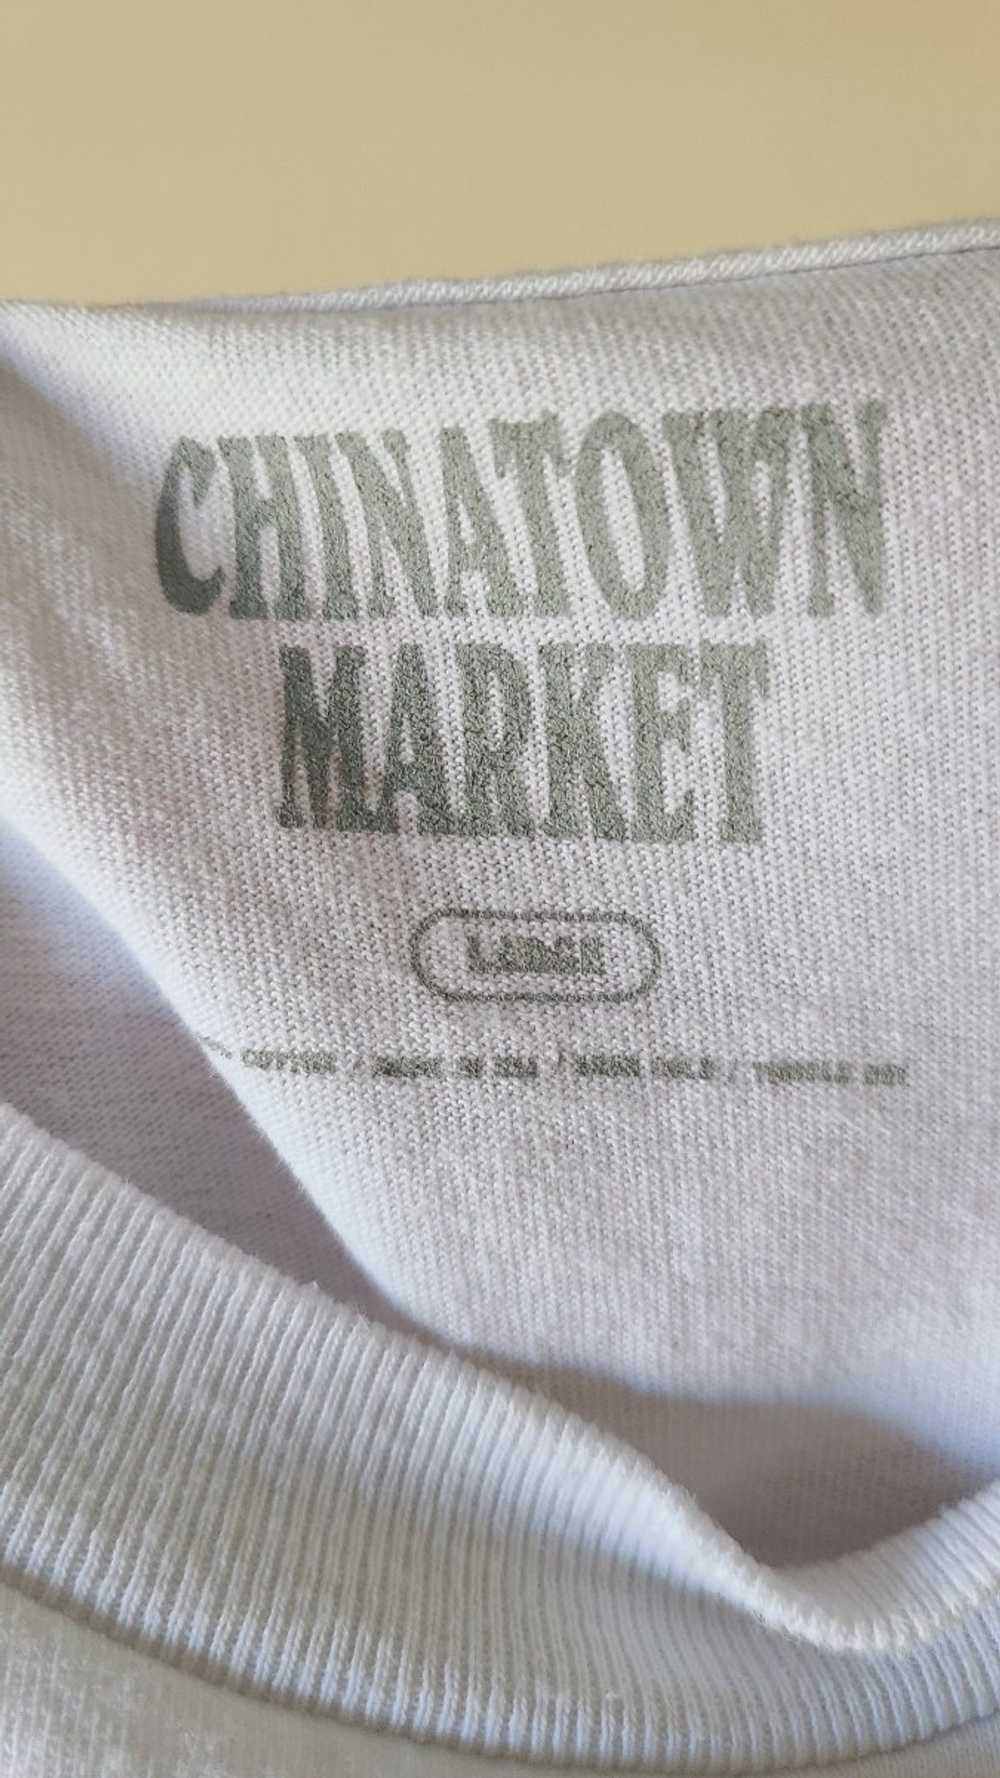 Chinatown Market - FRIENDS AND FAMILY TEE - image 3